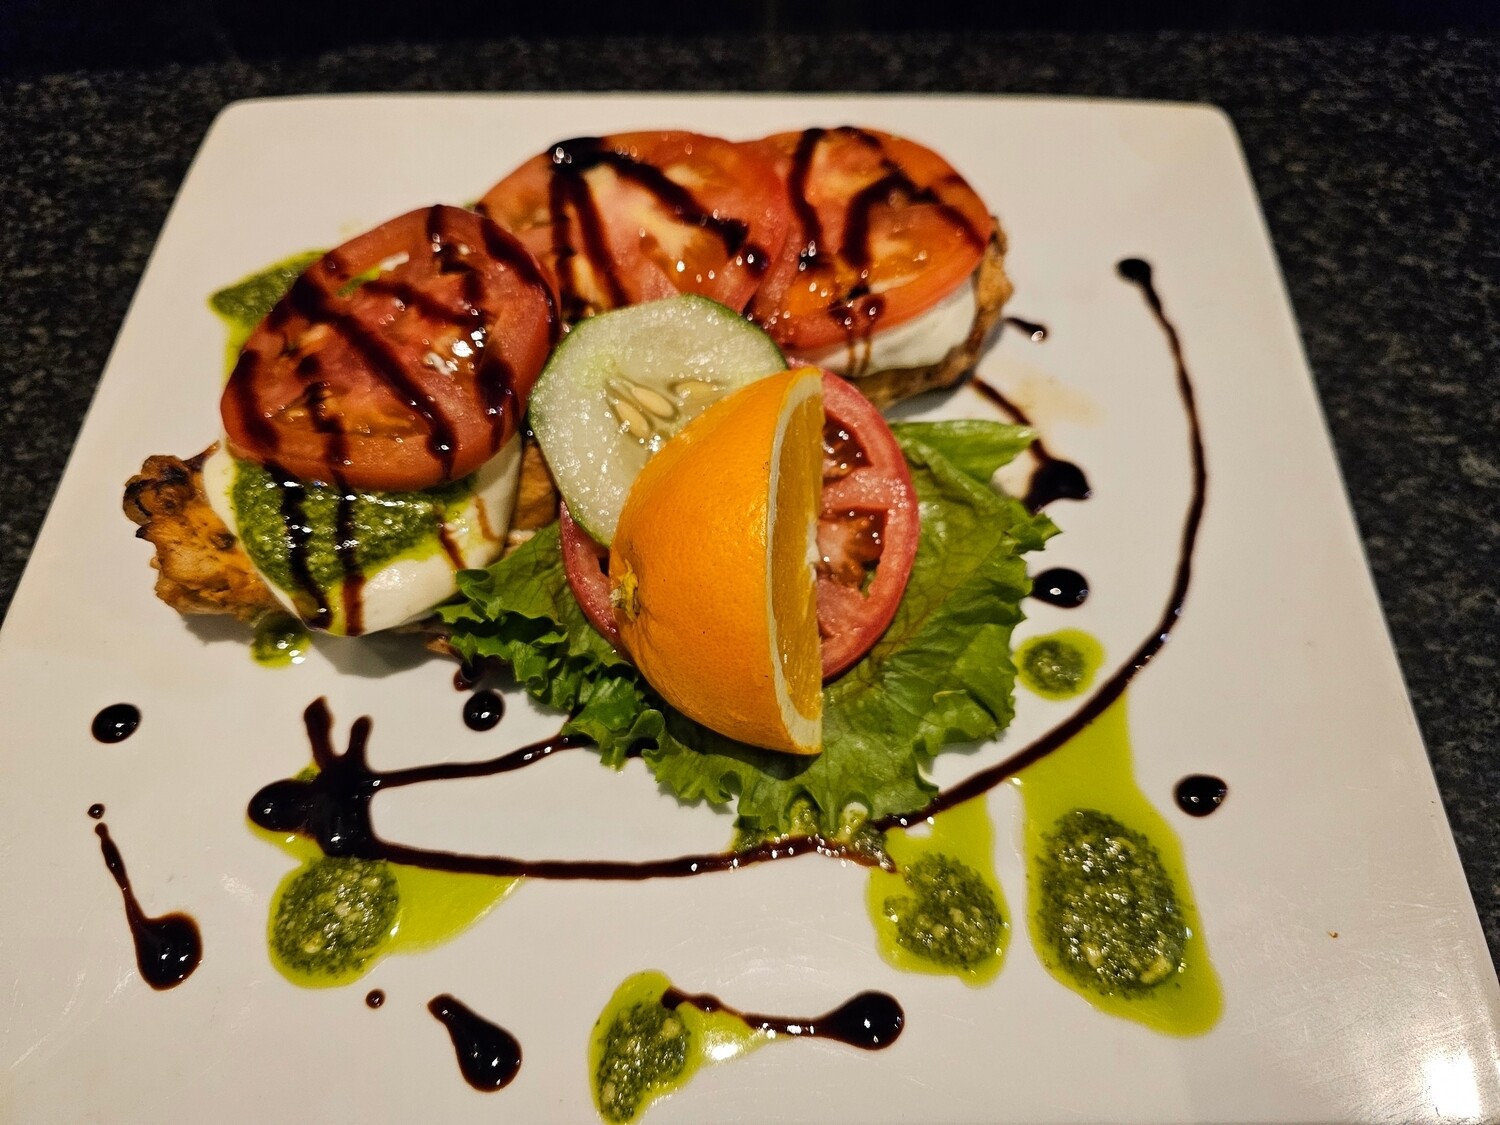 Dinner D - Caprese Chicken (served from 4 - 9 pm)